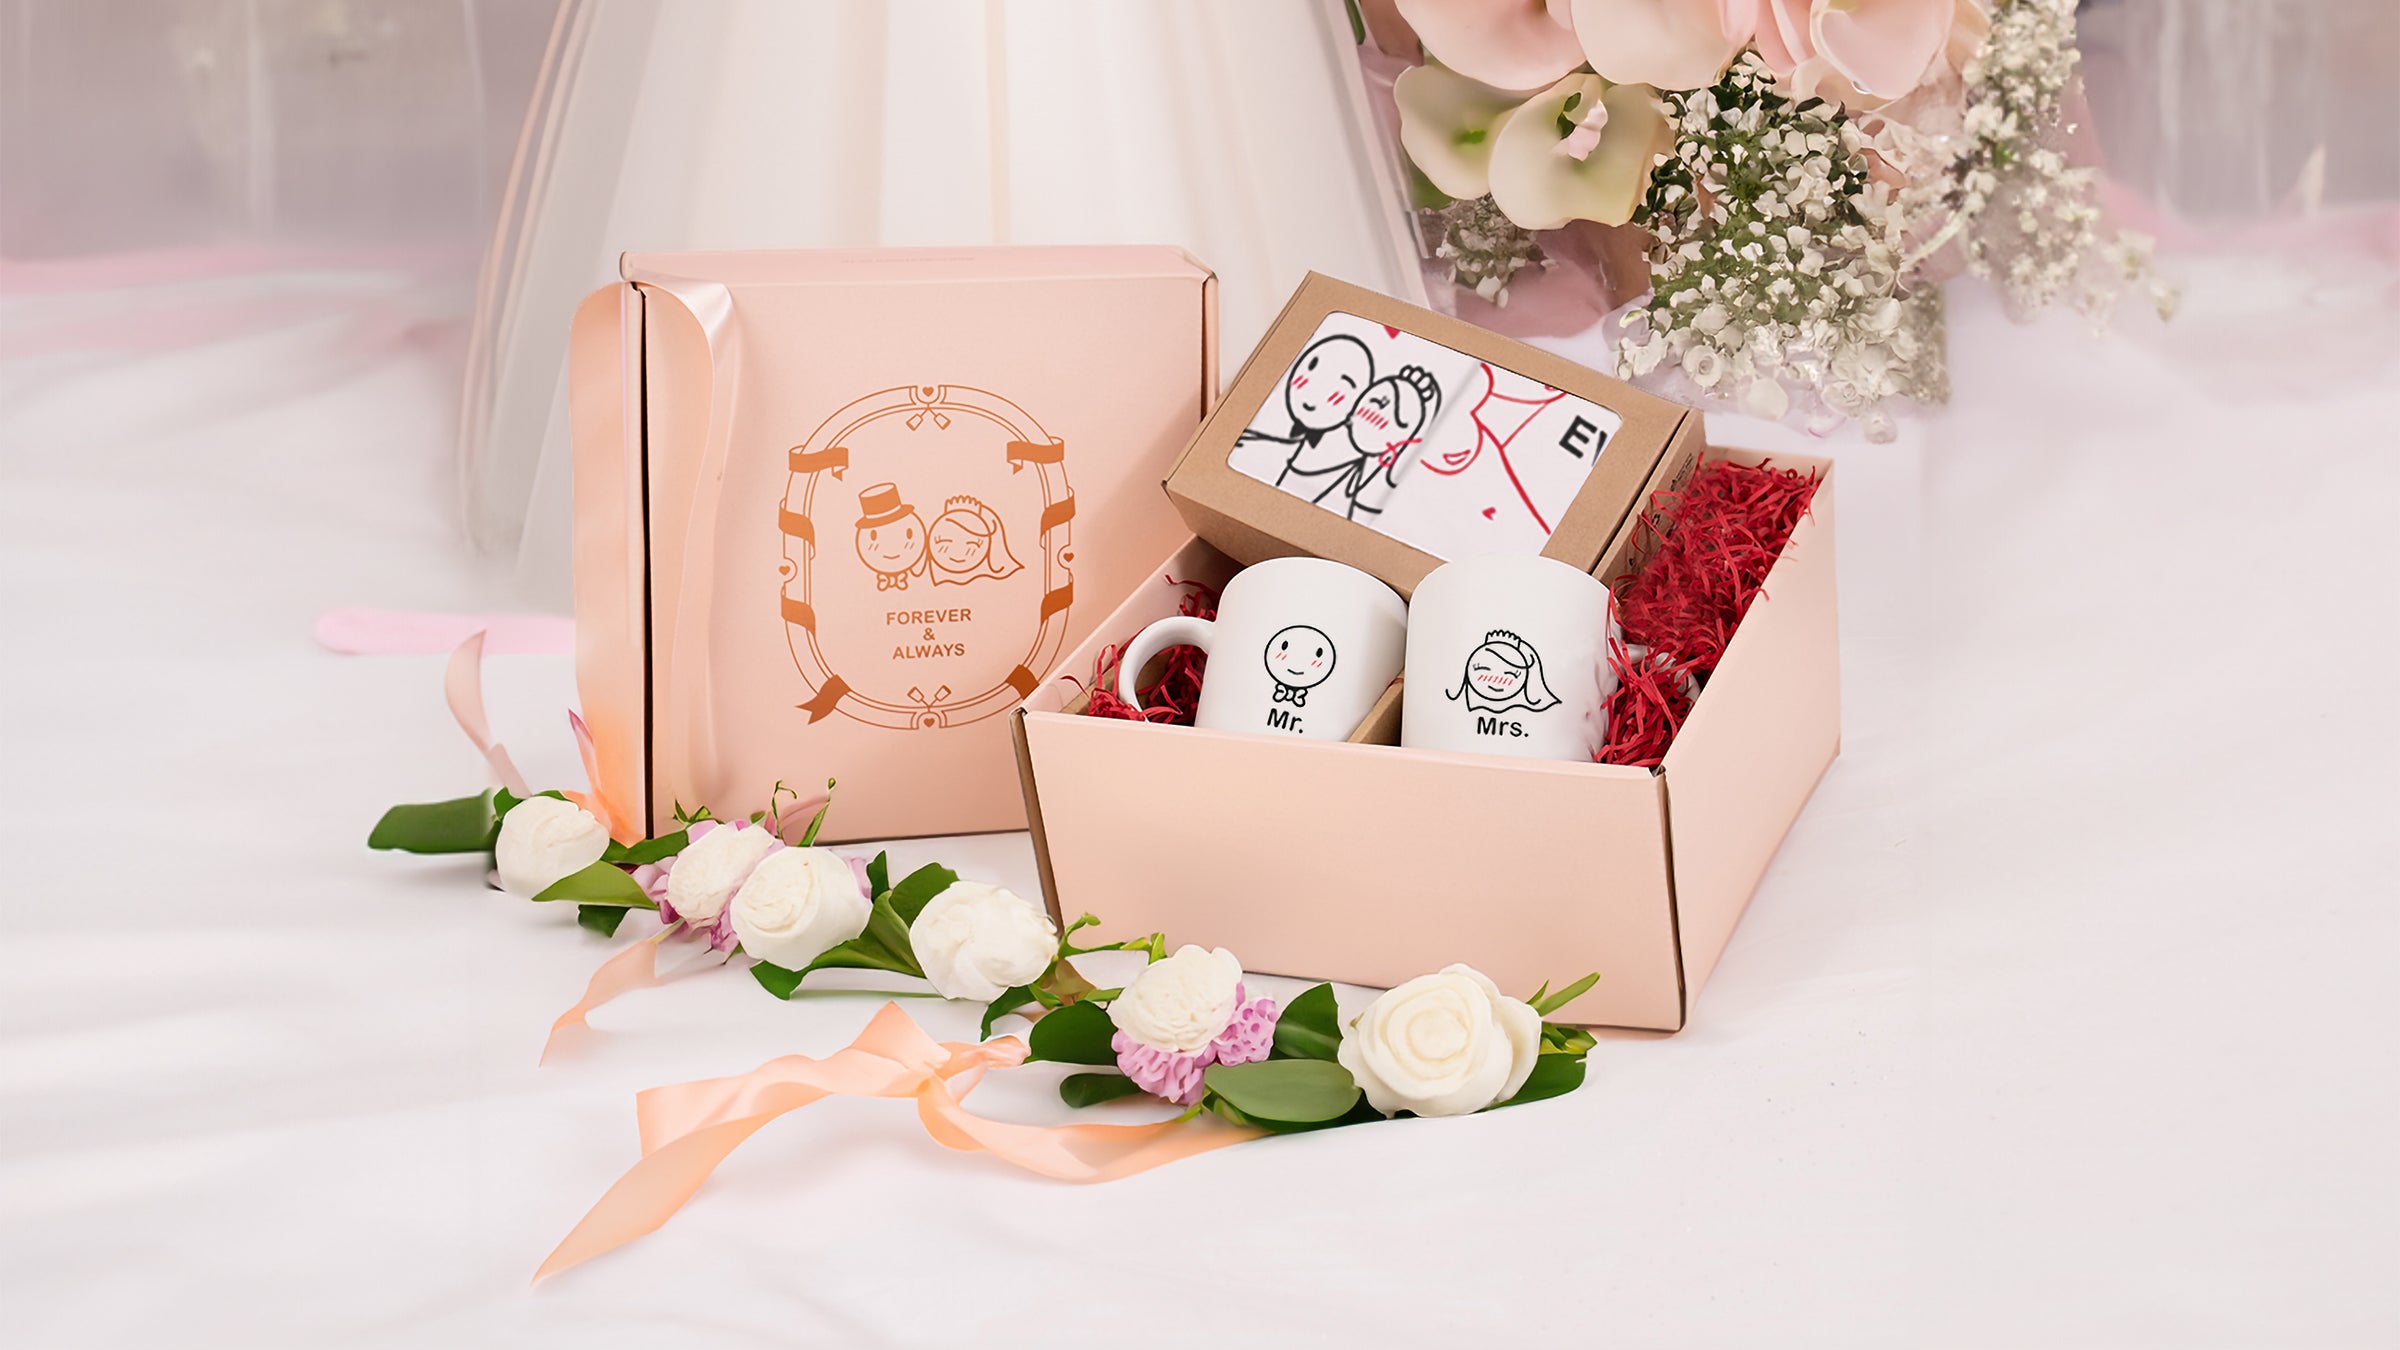 BoldLoft Wedding Gift Set for Couples: Bride and Groom Pillowcases and Mugs in Gift-Ready Box